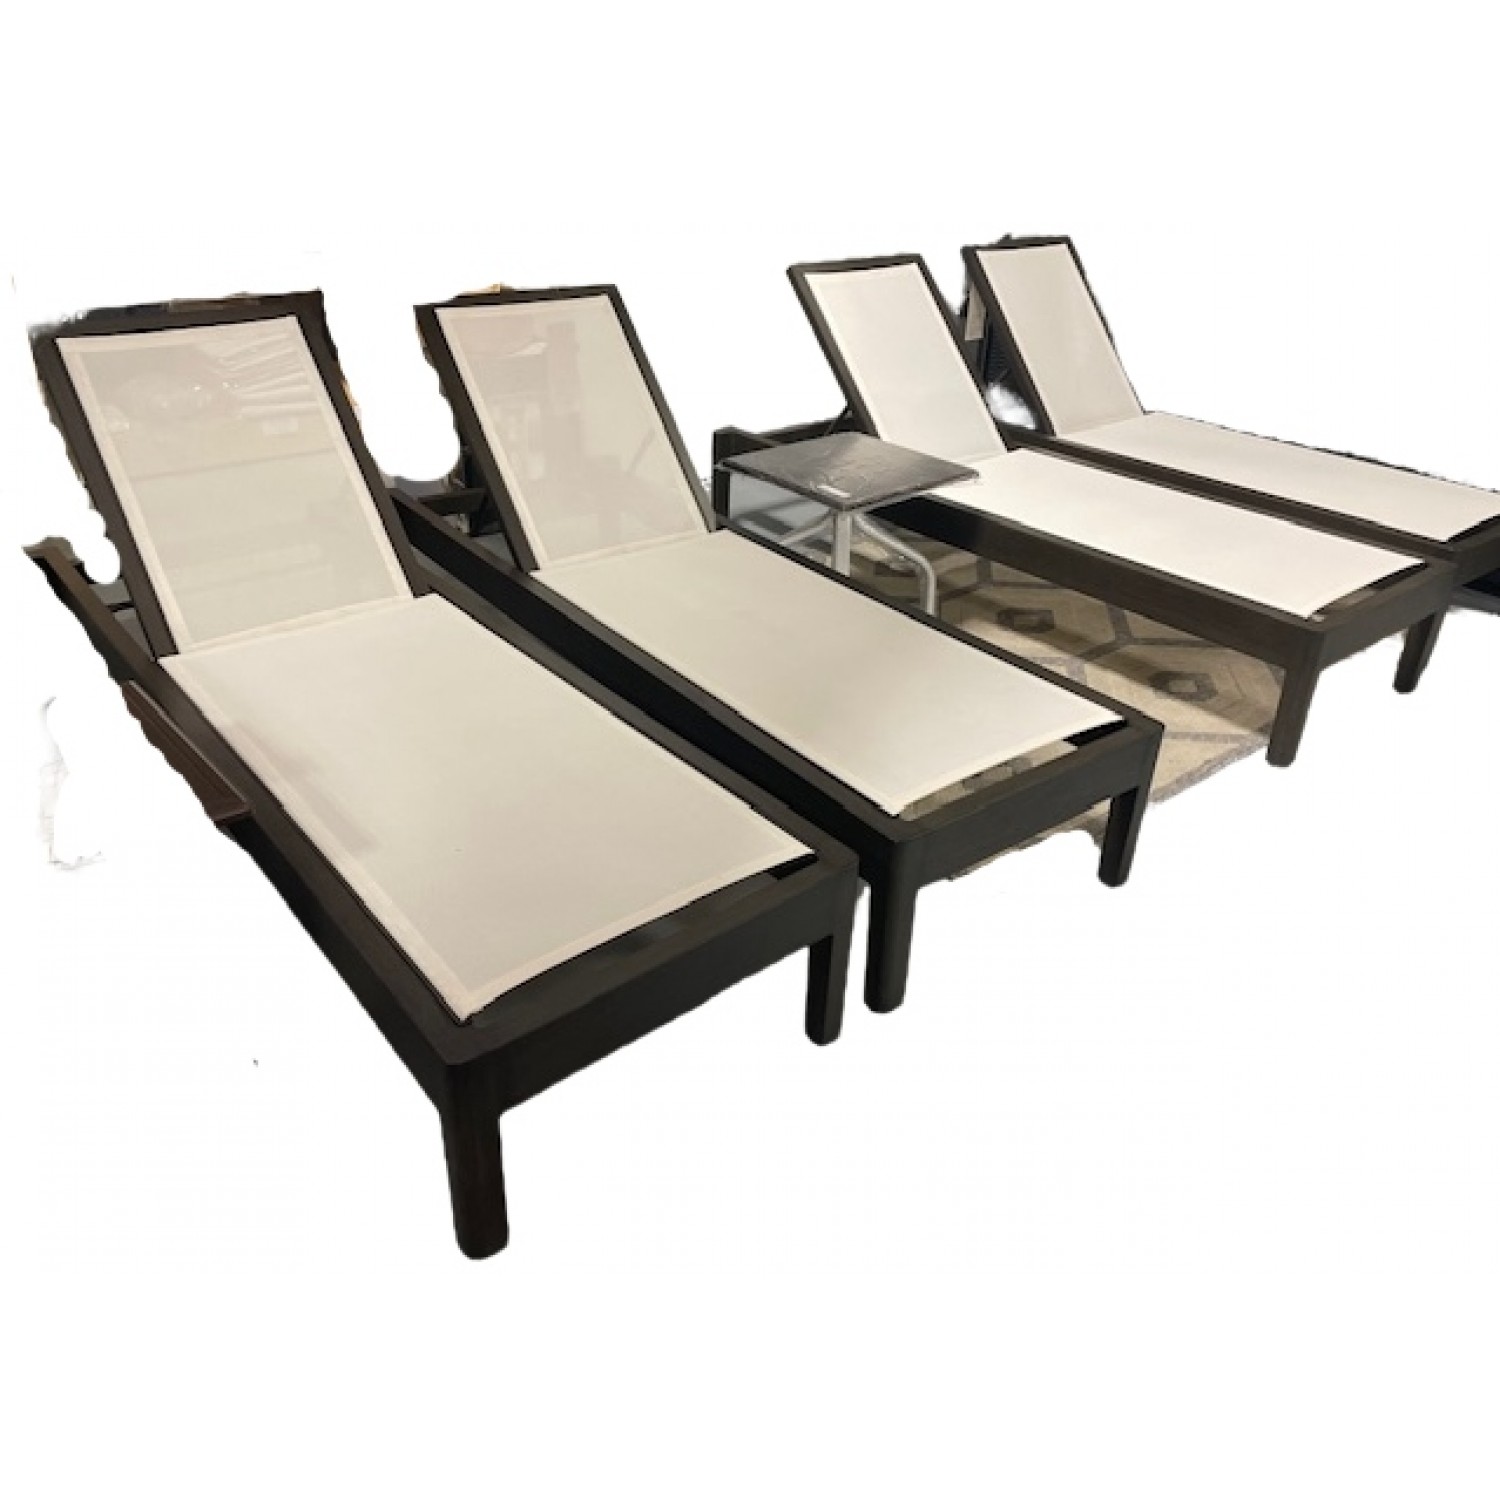 Element Patio Chaise Lounger